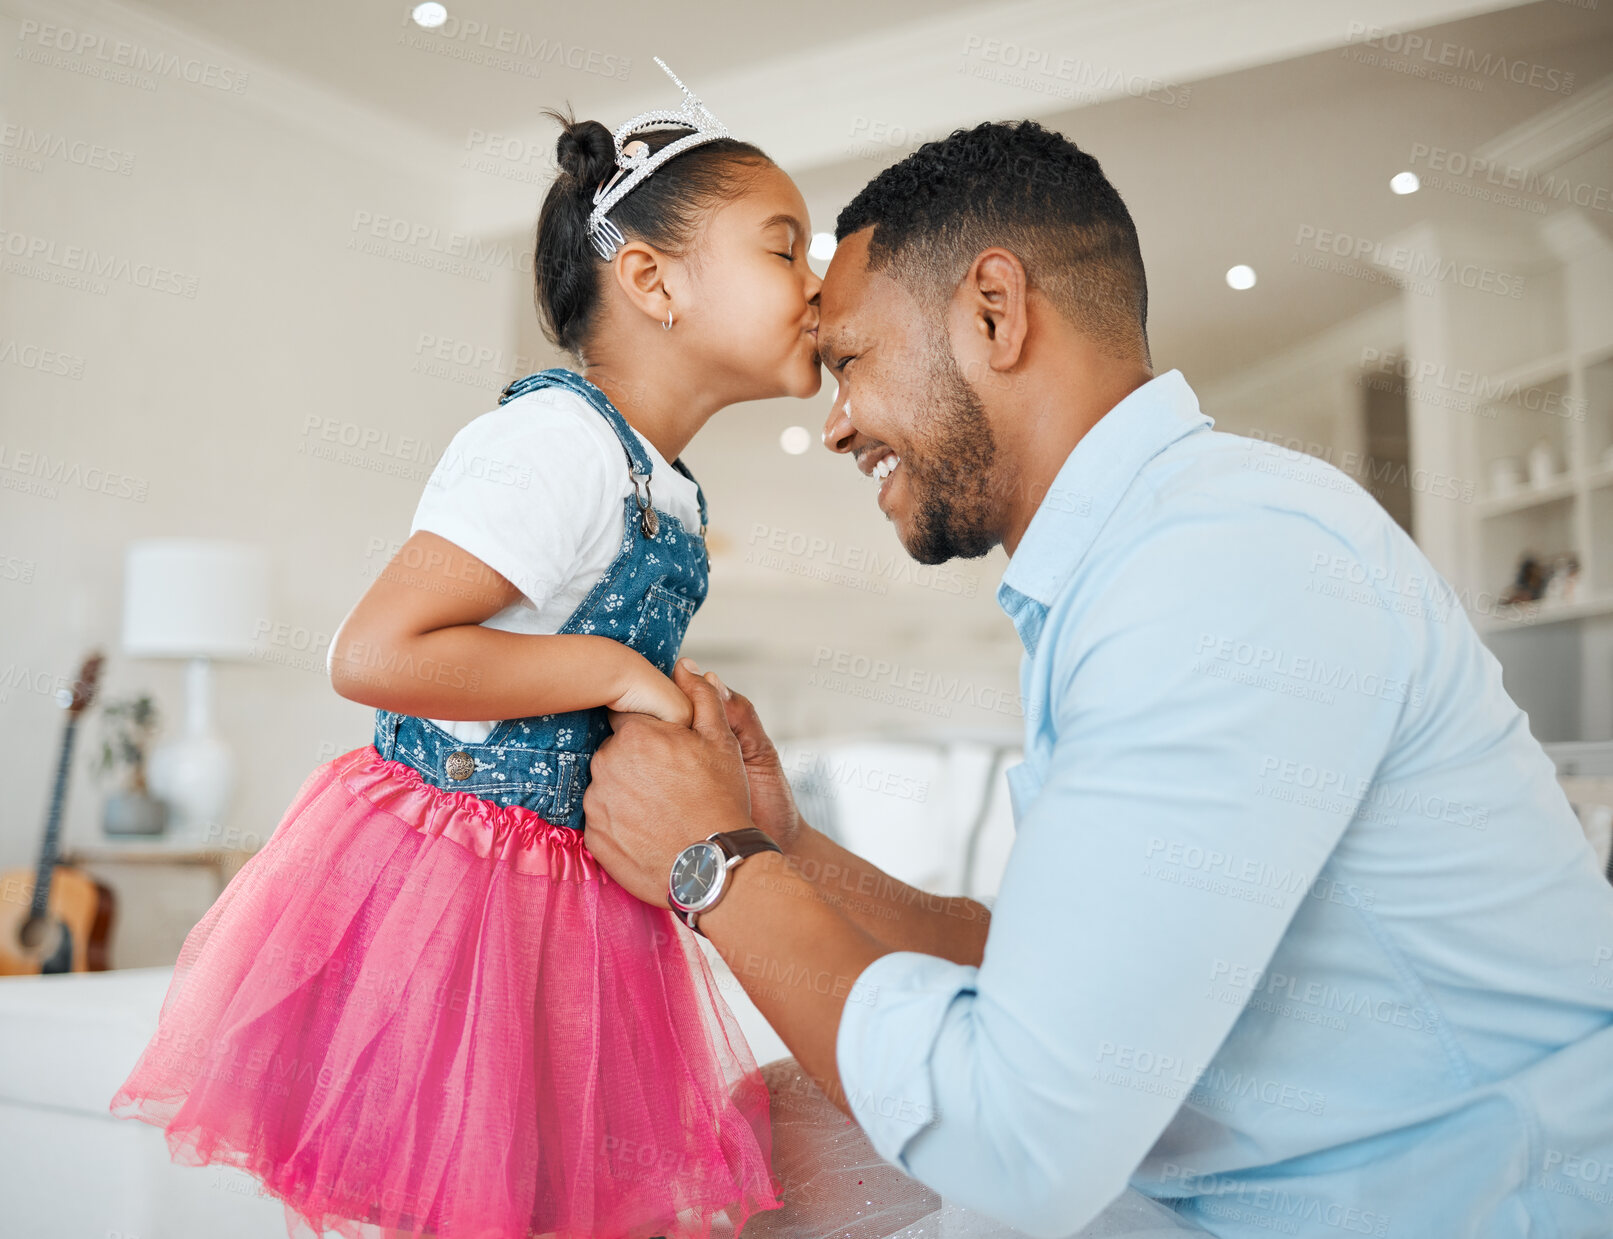 Buy stock photo Shot of a little girl giving her dad a kiss at home